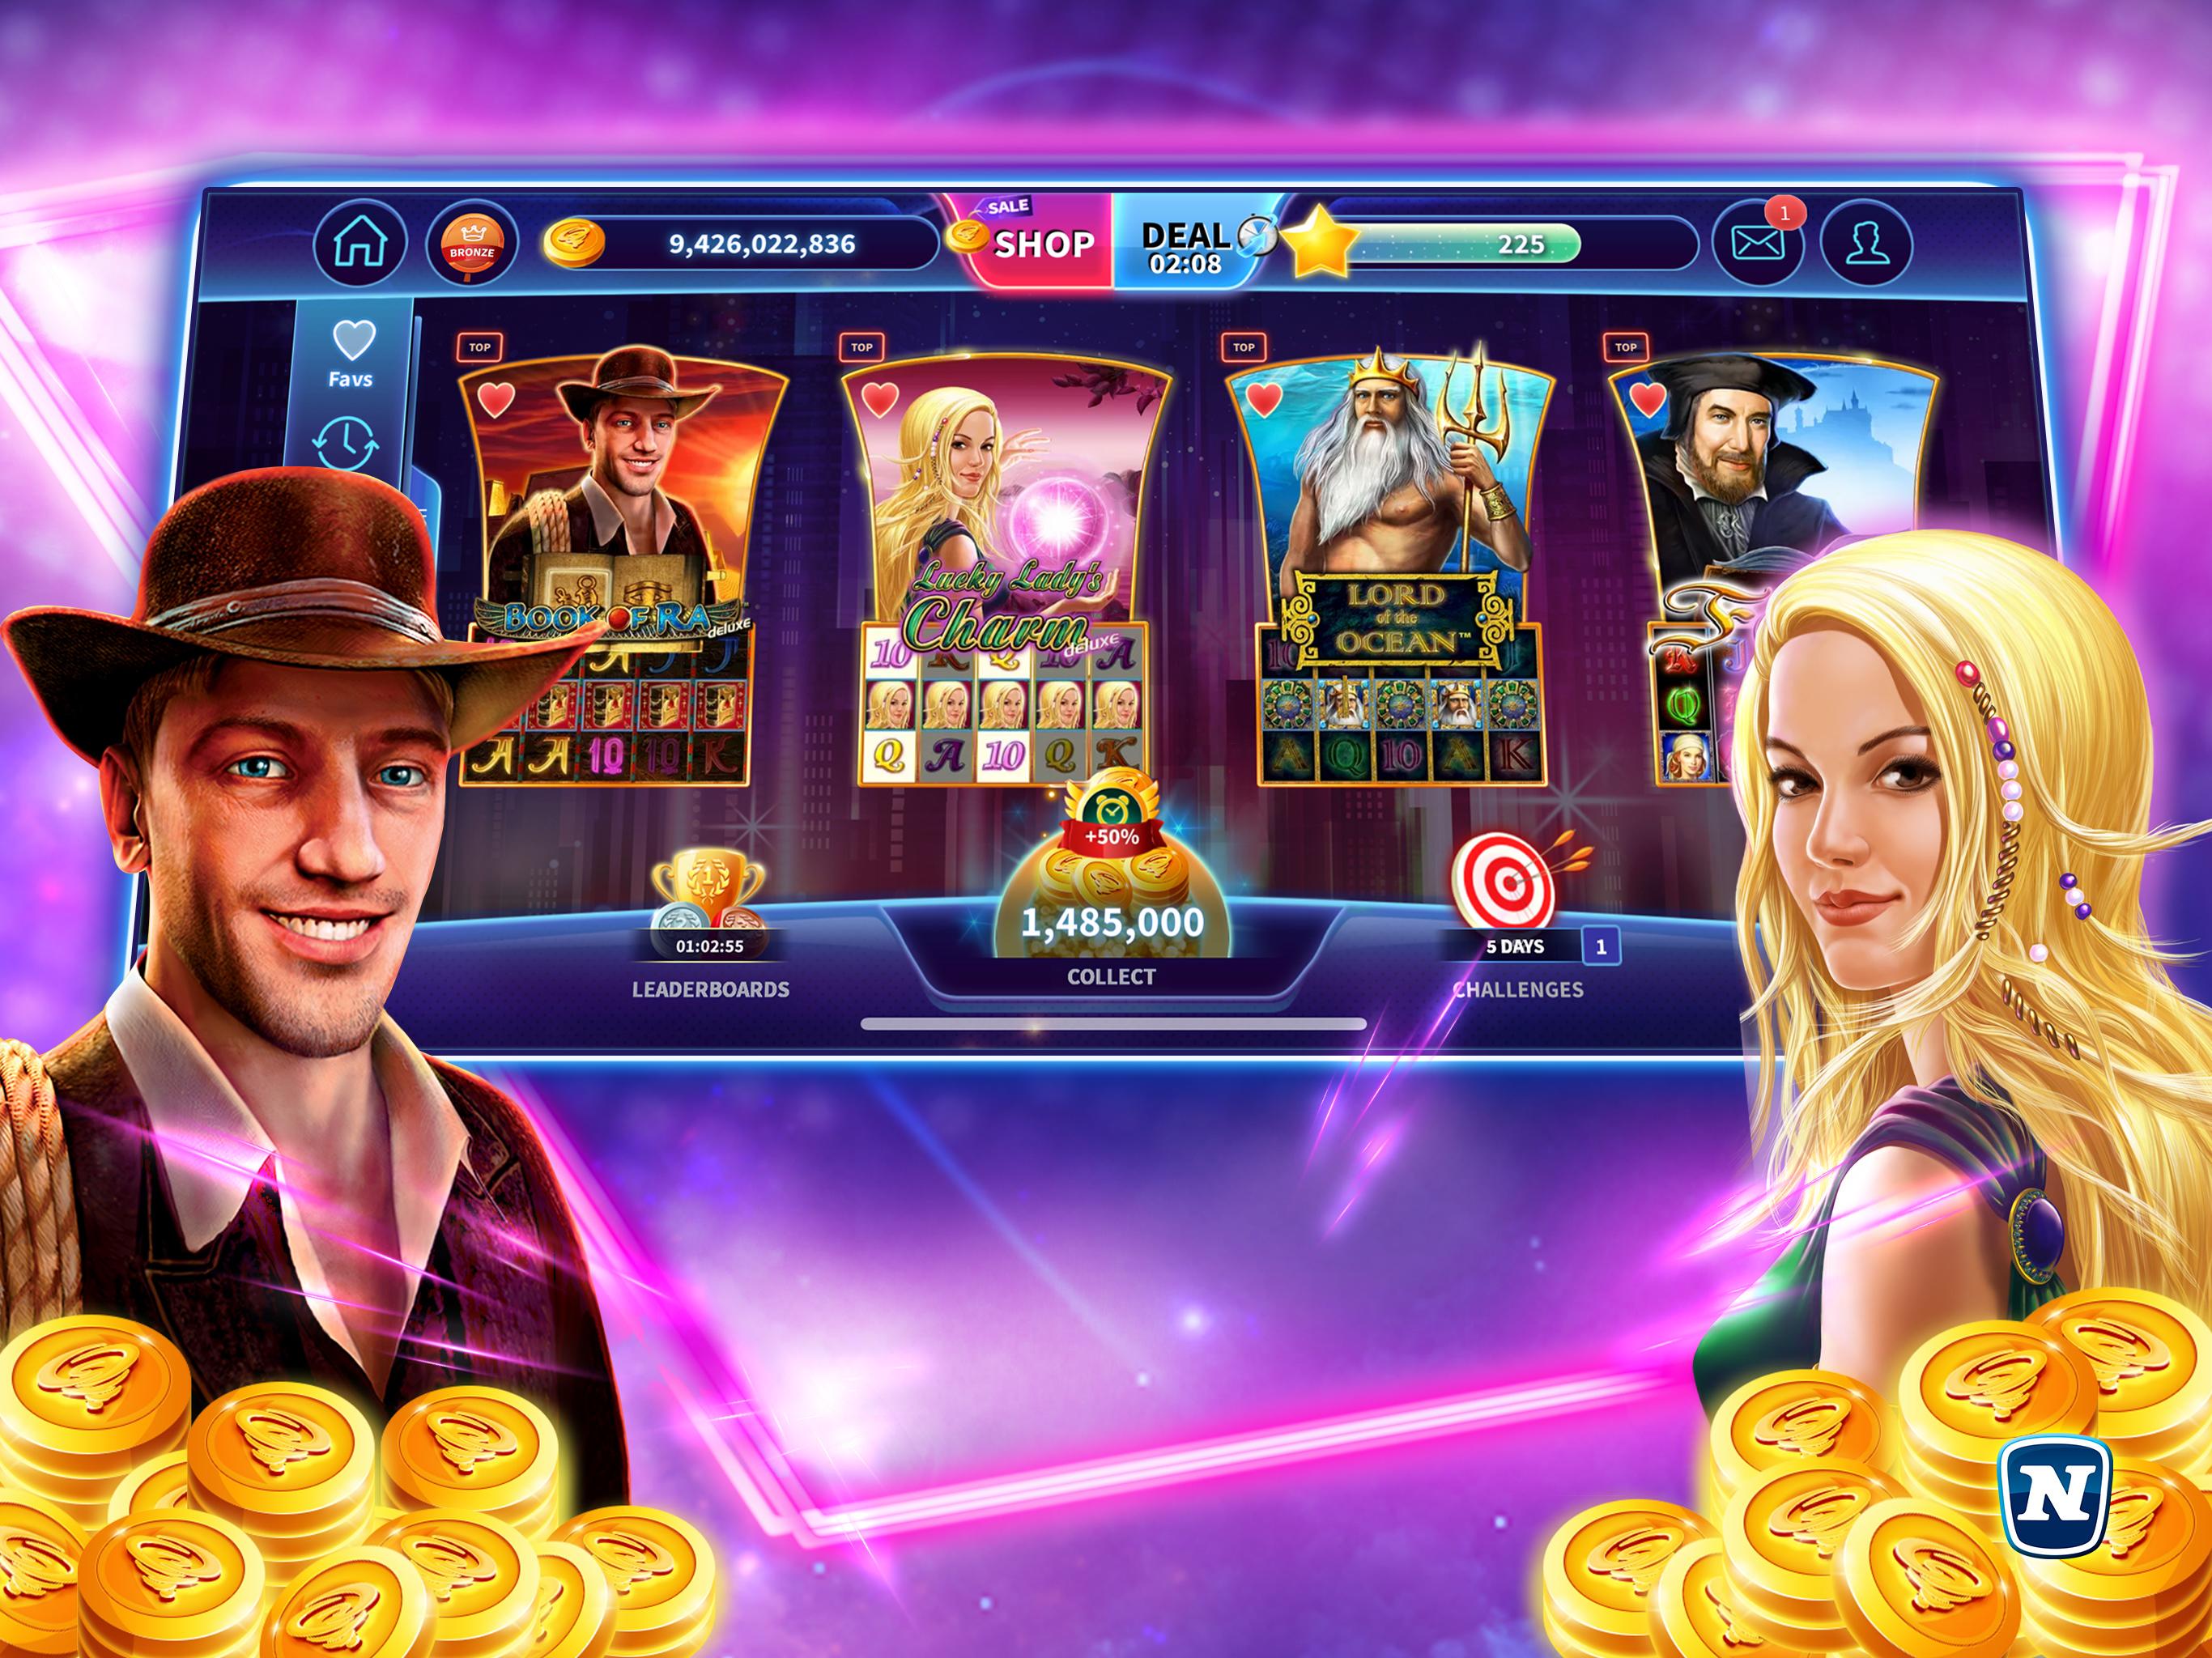 Website, says casino: great article